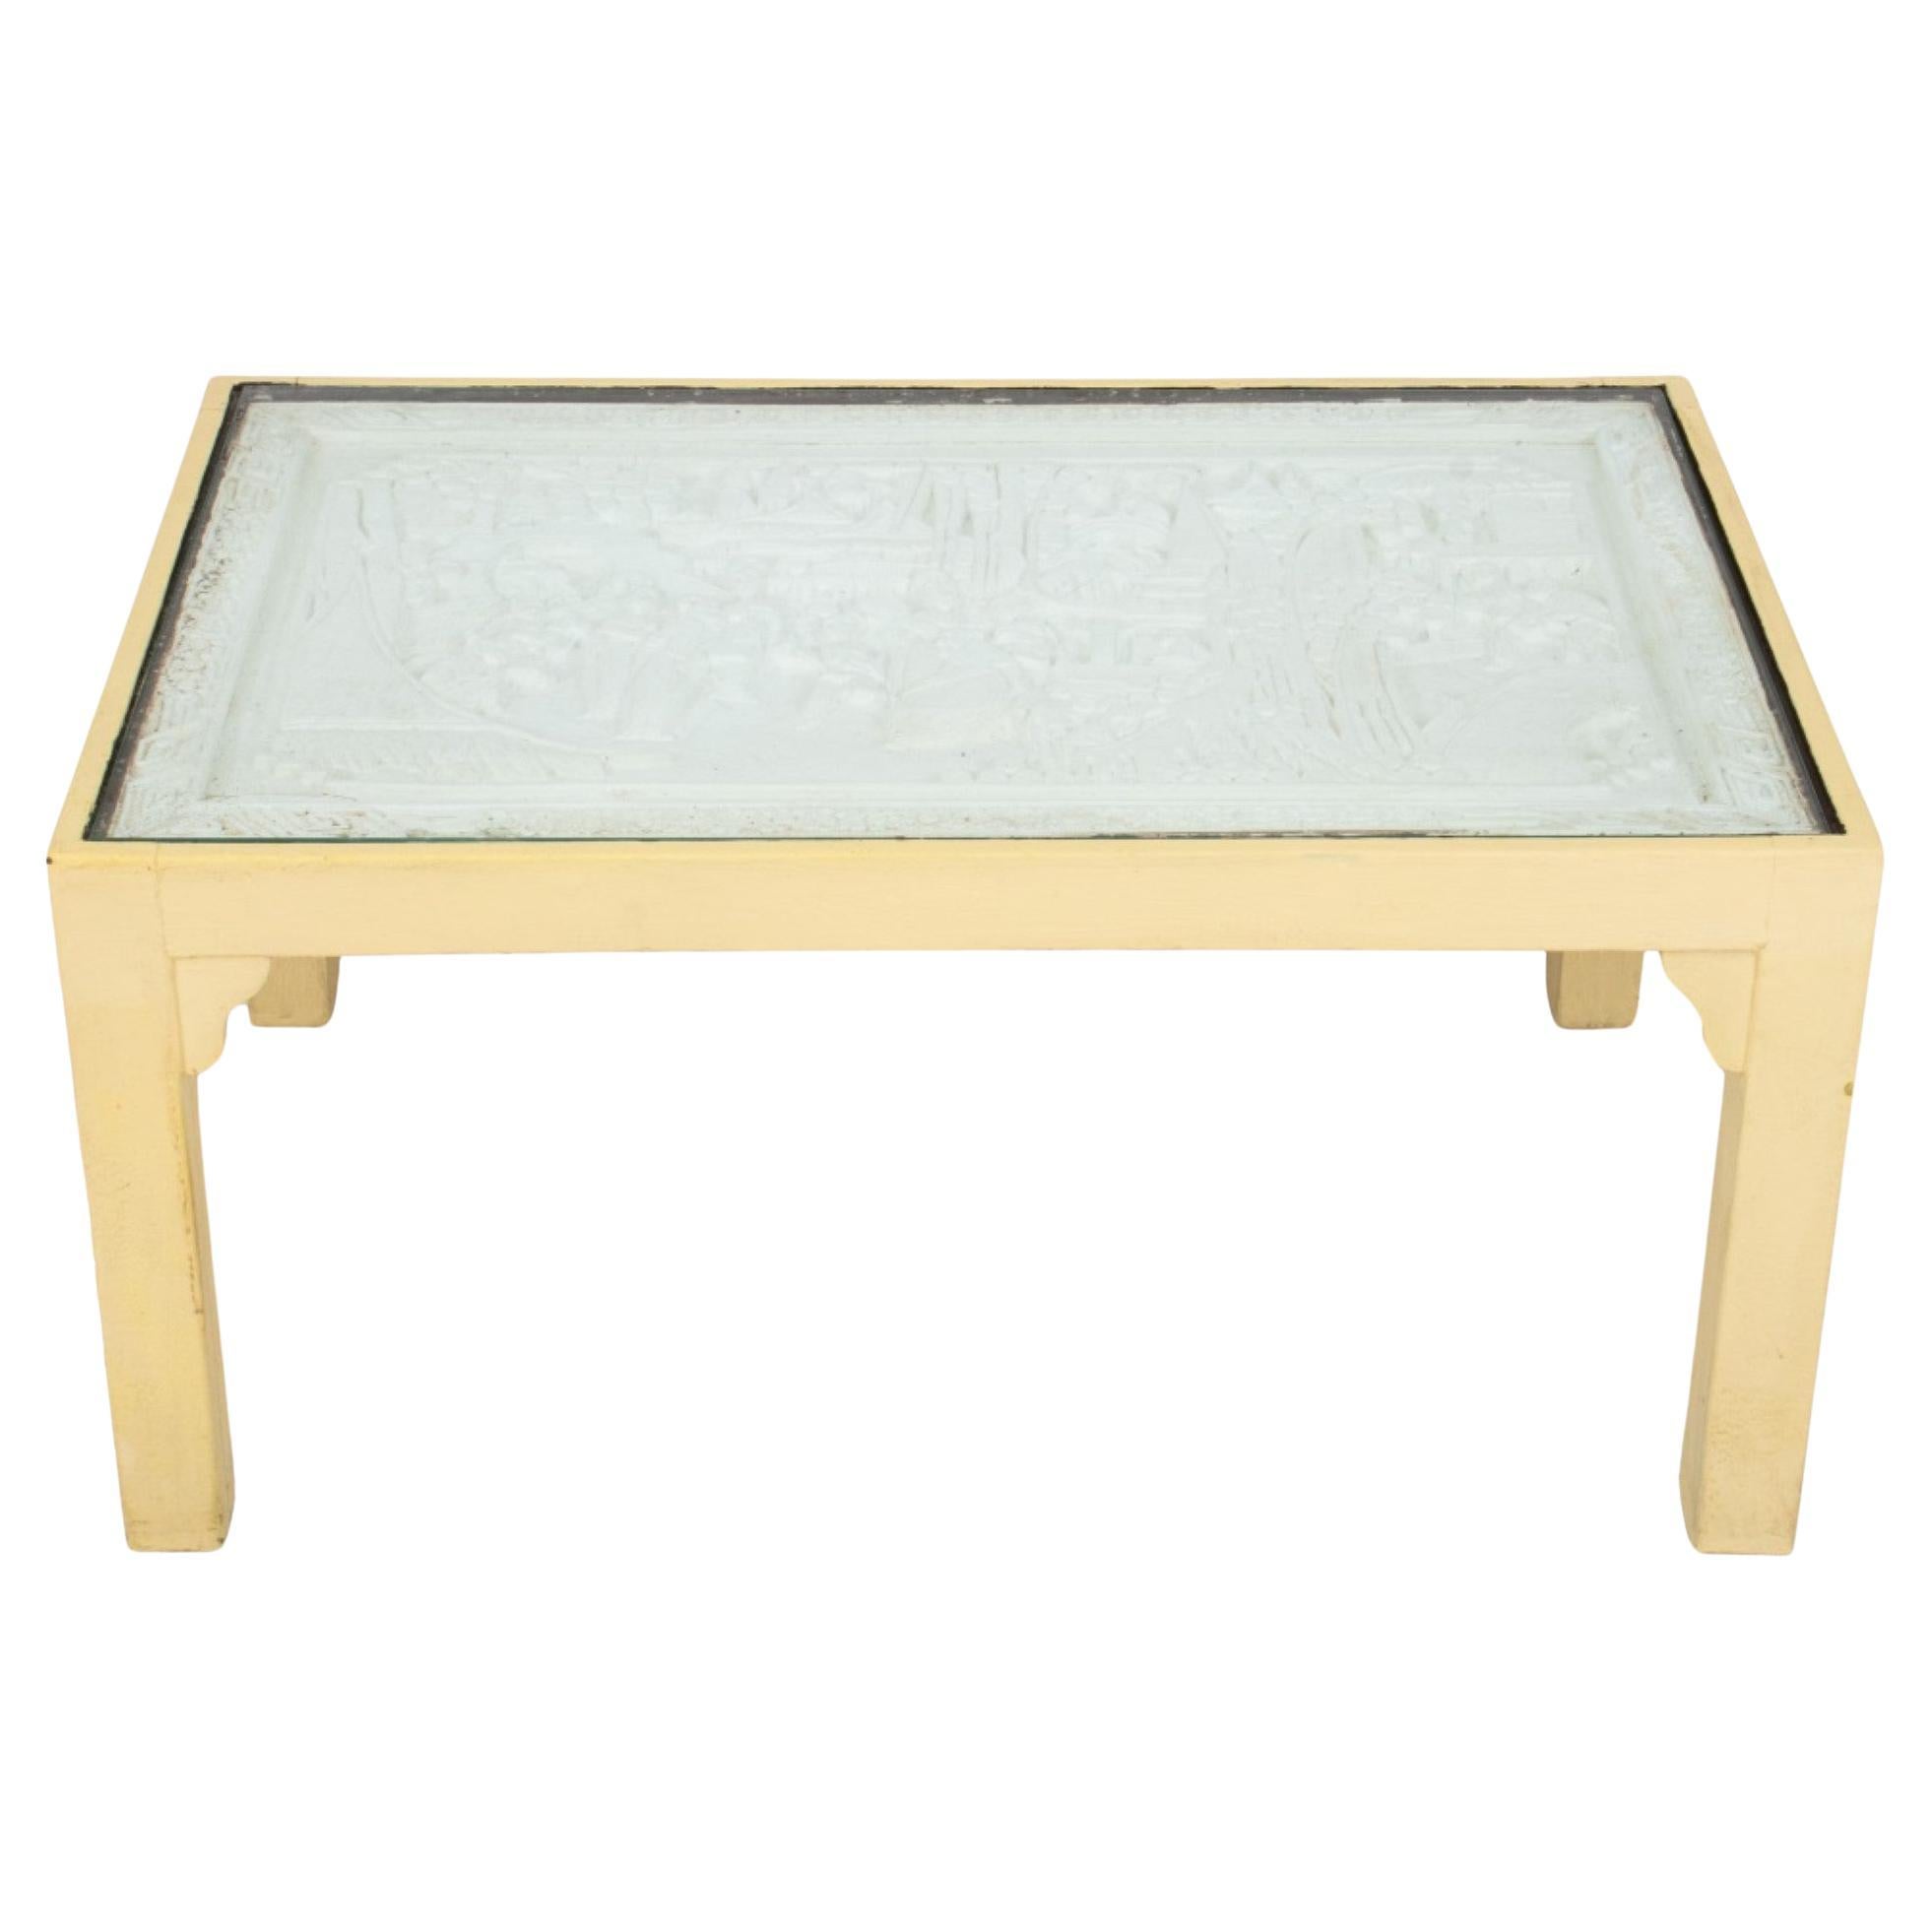 Modern Chinese Plaster Panel Mounted Coffee Table